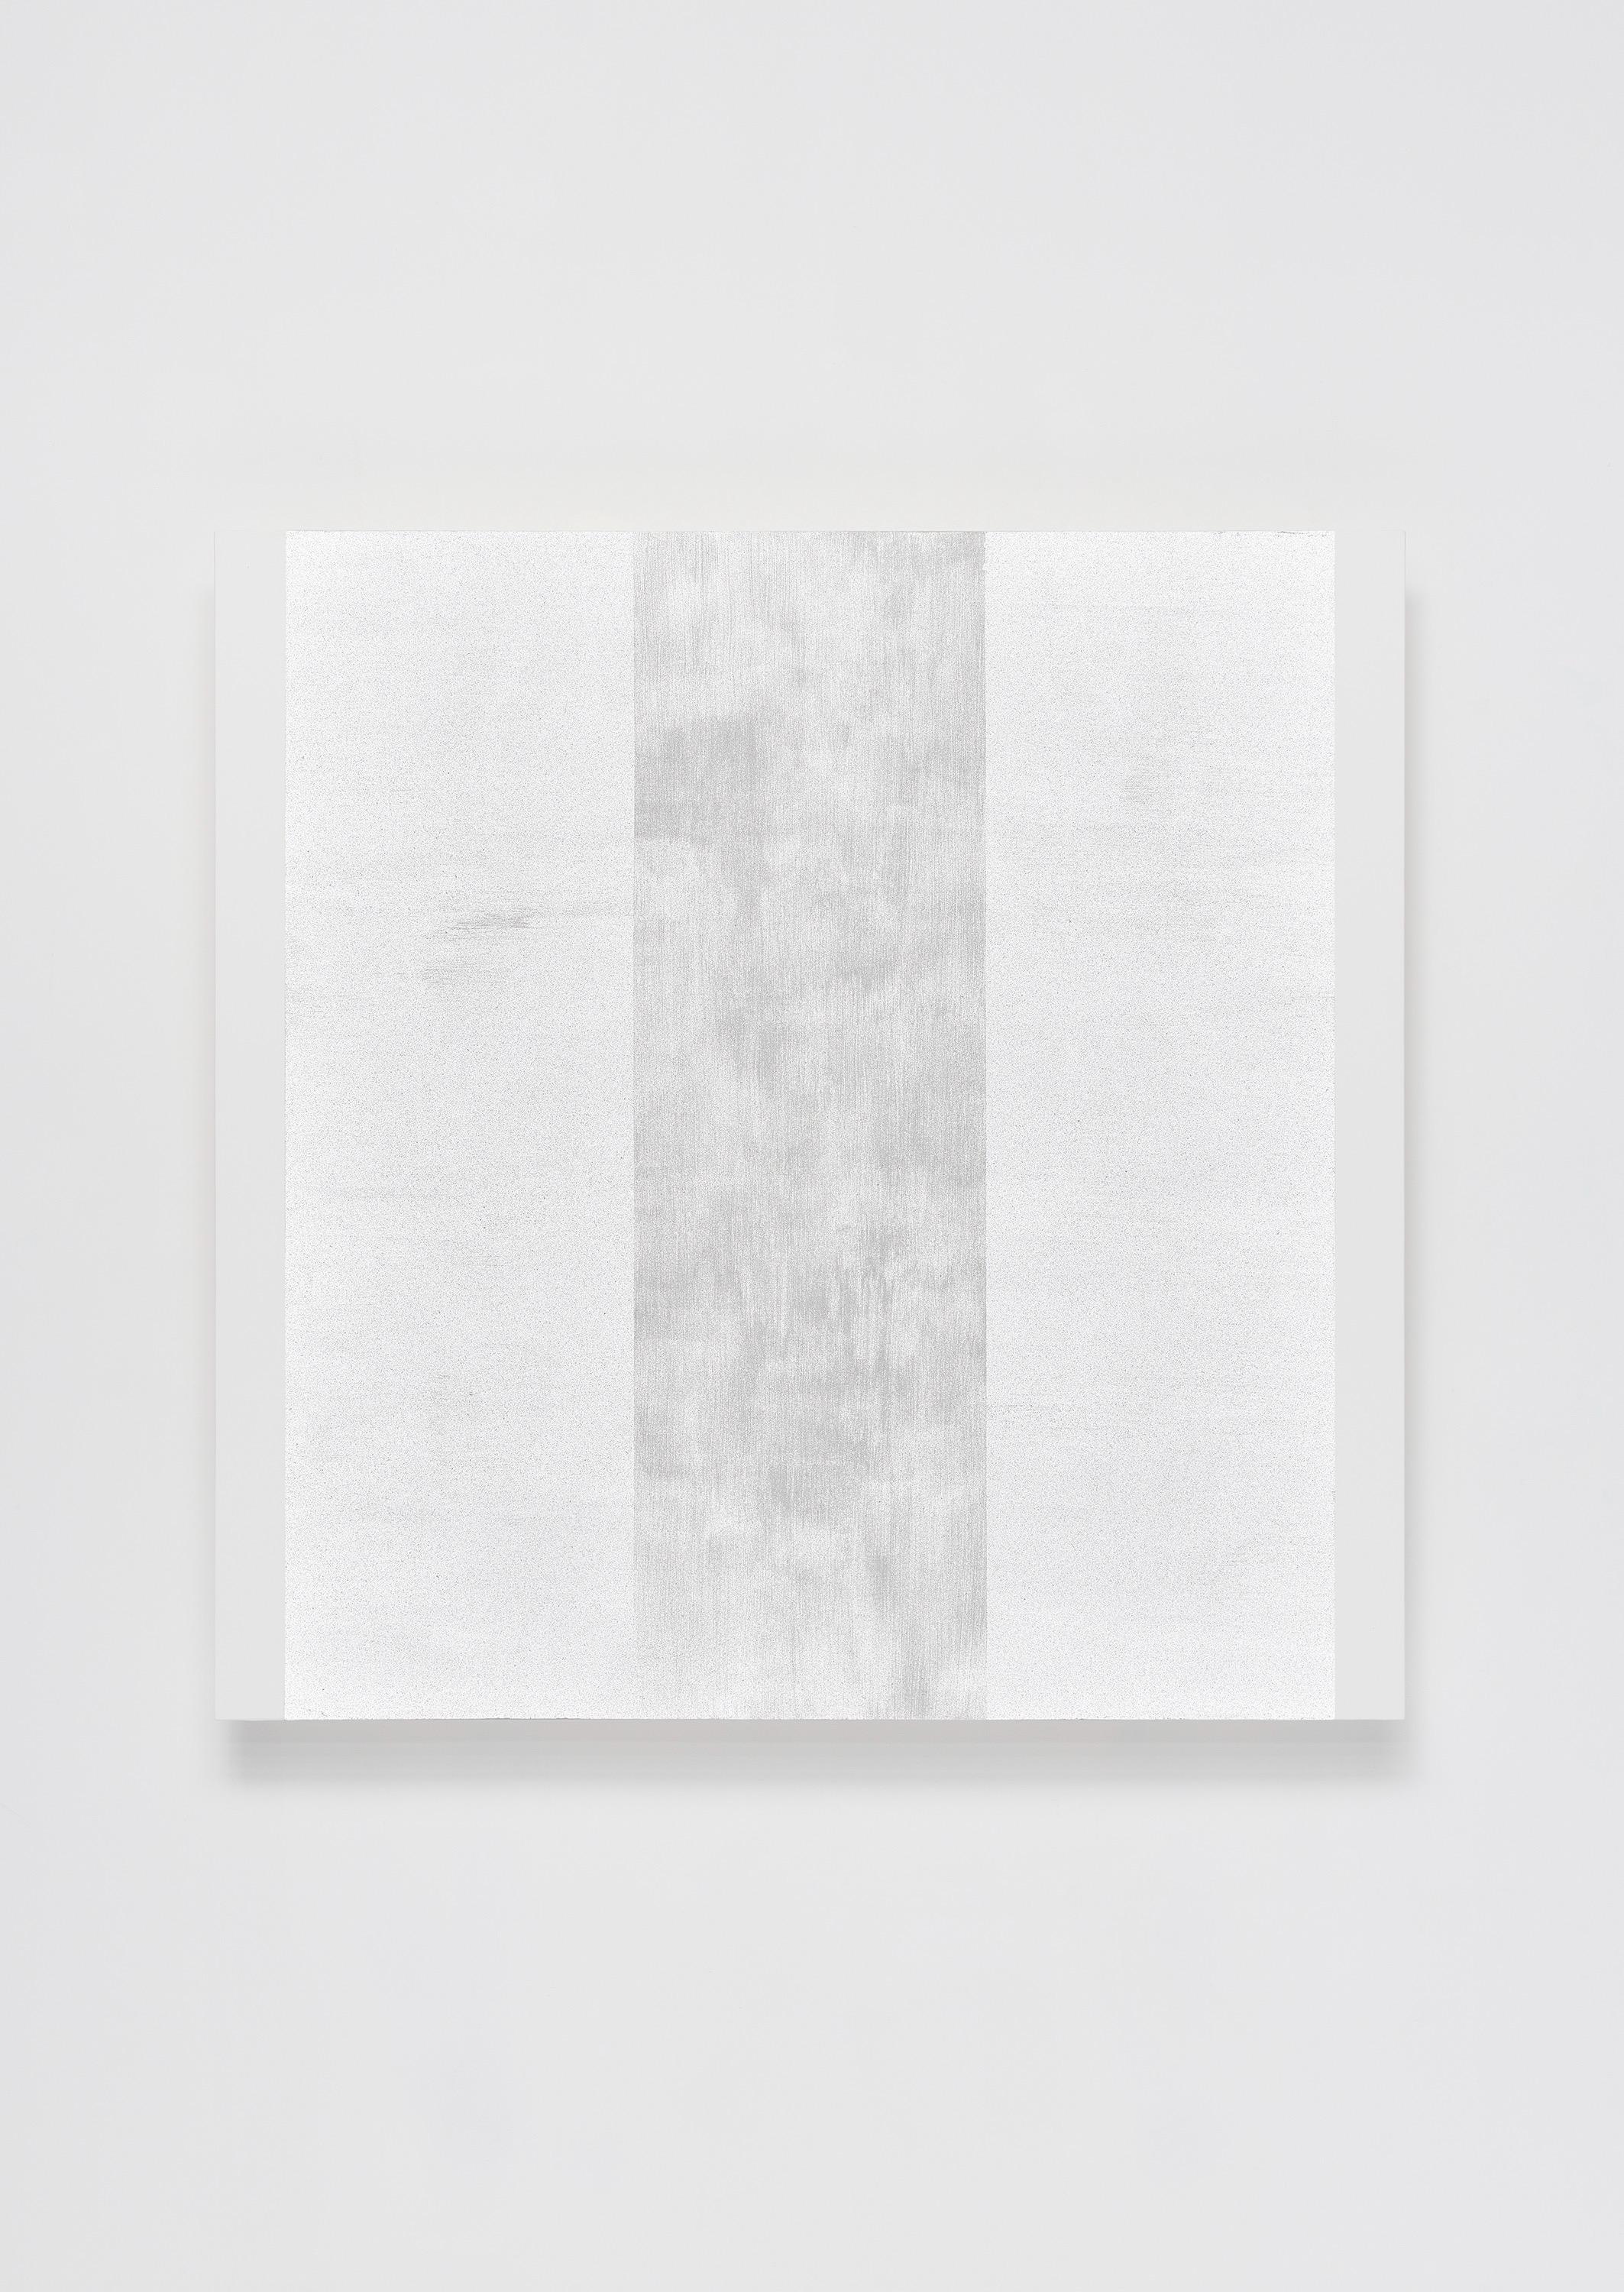 Mary Corse, Untitled (White Inner Band, Beveled), 2022, glass microspheres in acrylic on canvas, 127 cm× 127cm× 10.2 cm Photography: Flying Studio, Los Angeles © Mary Corse, courtesy Pace Gallery